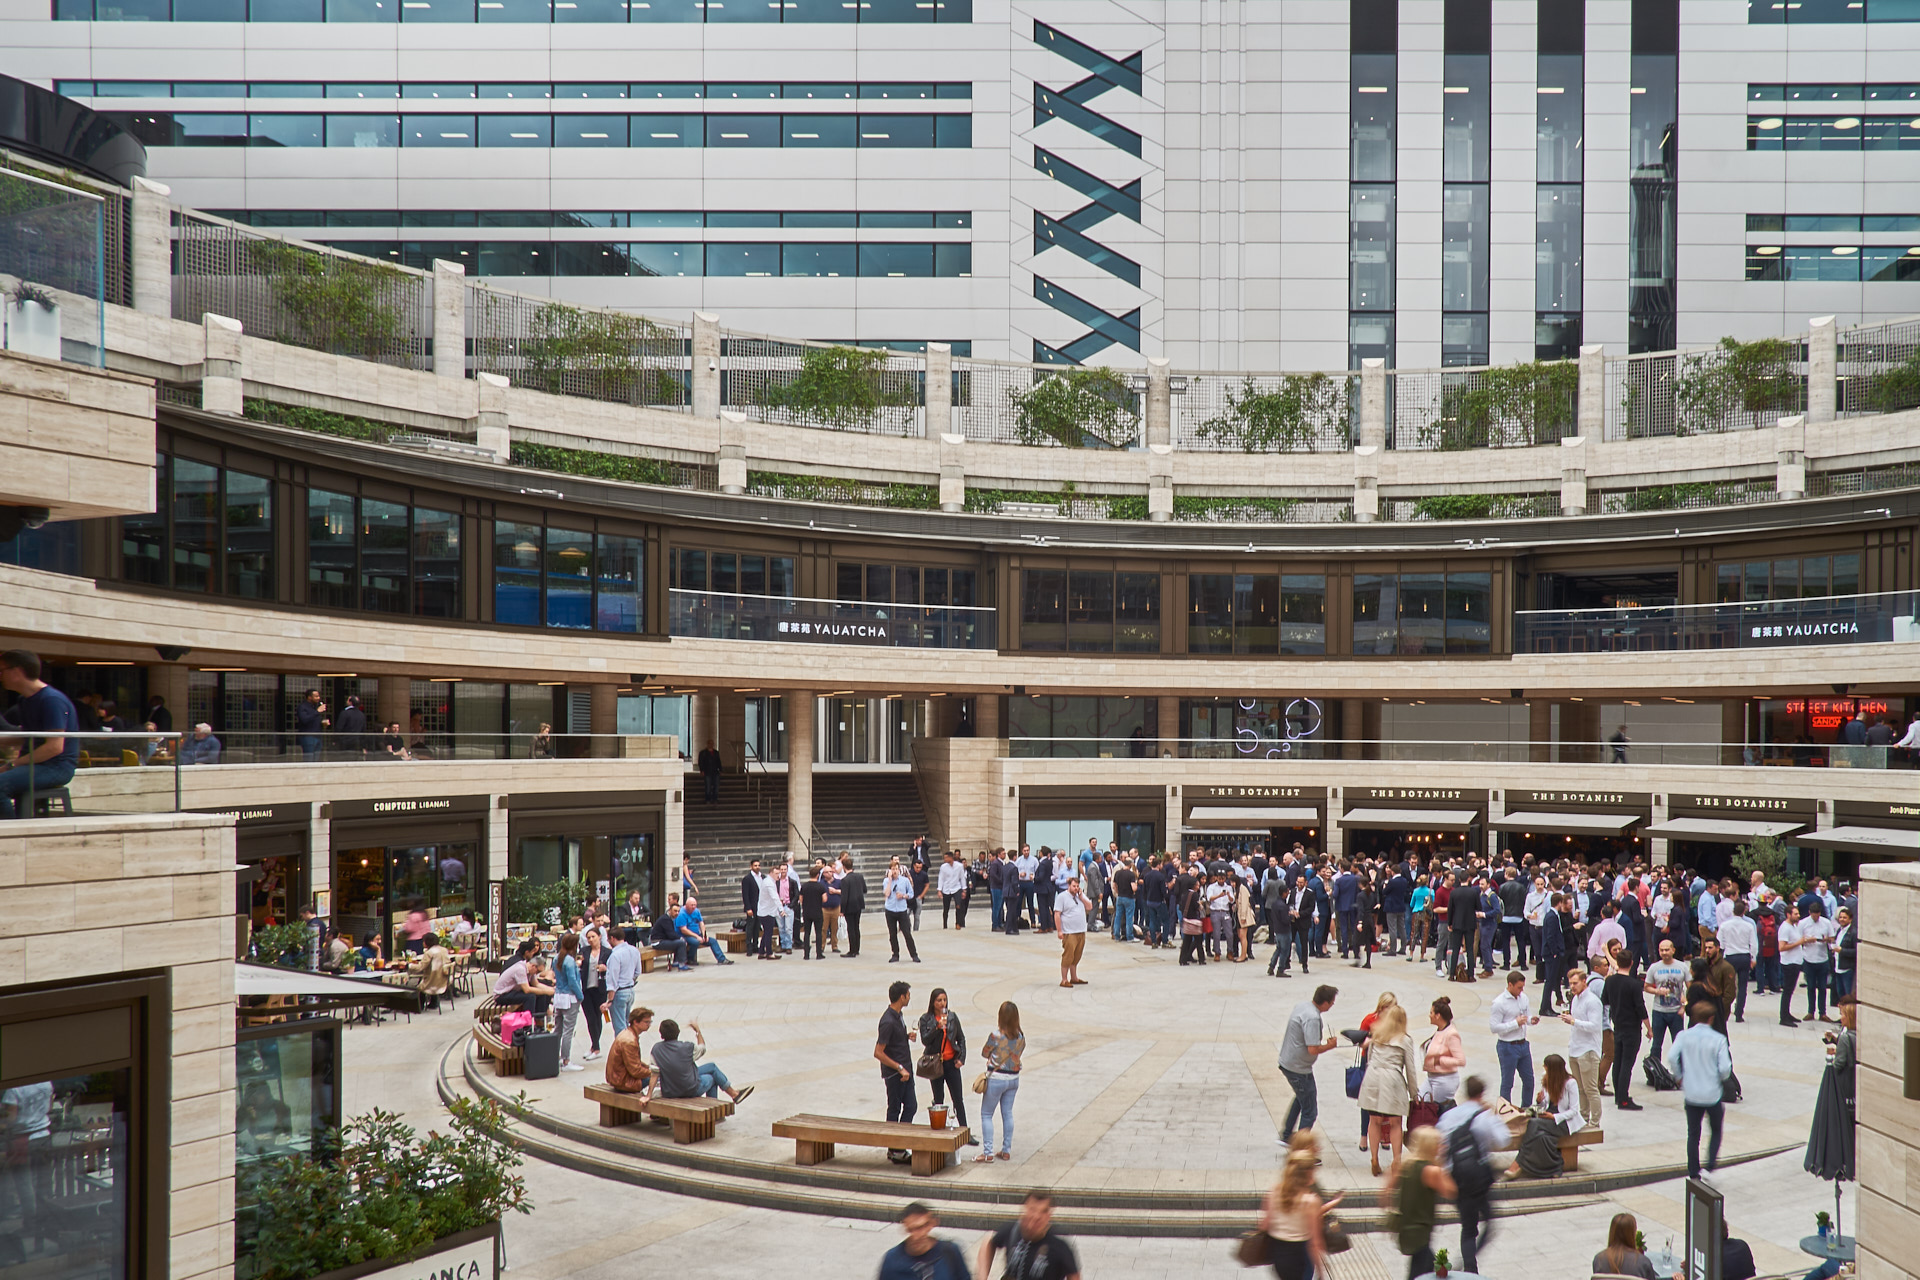 Broadgate Circus in 2016, background: 5 Broadgate, Make Architects, 2016.